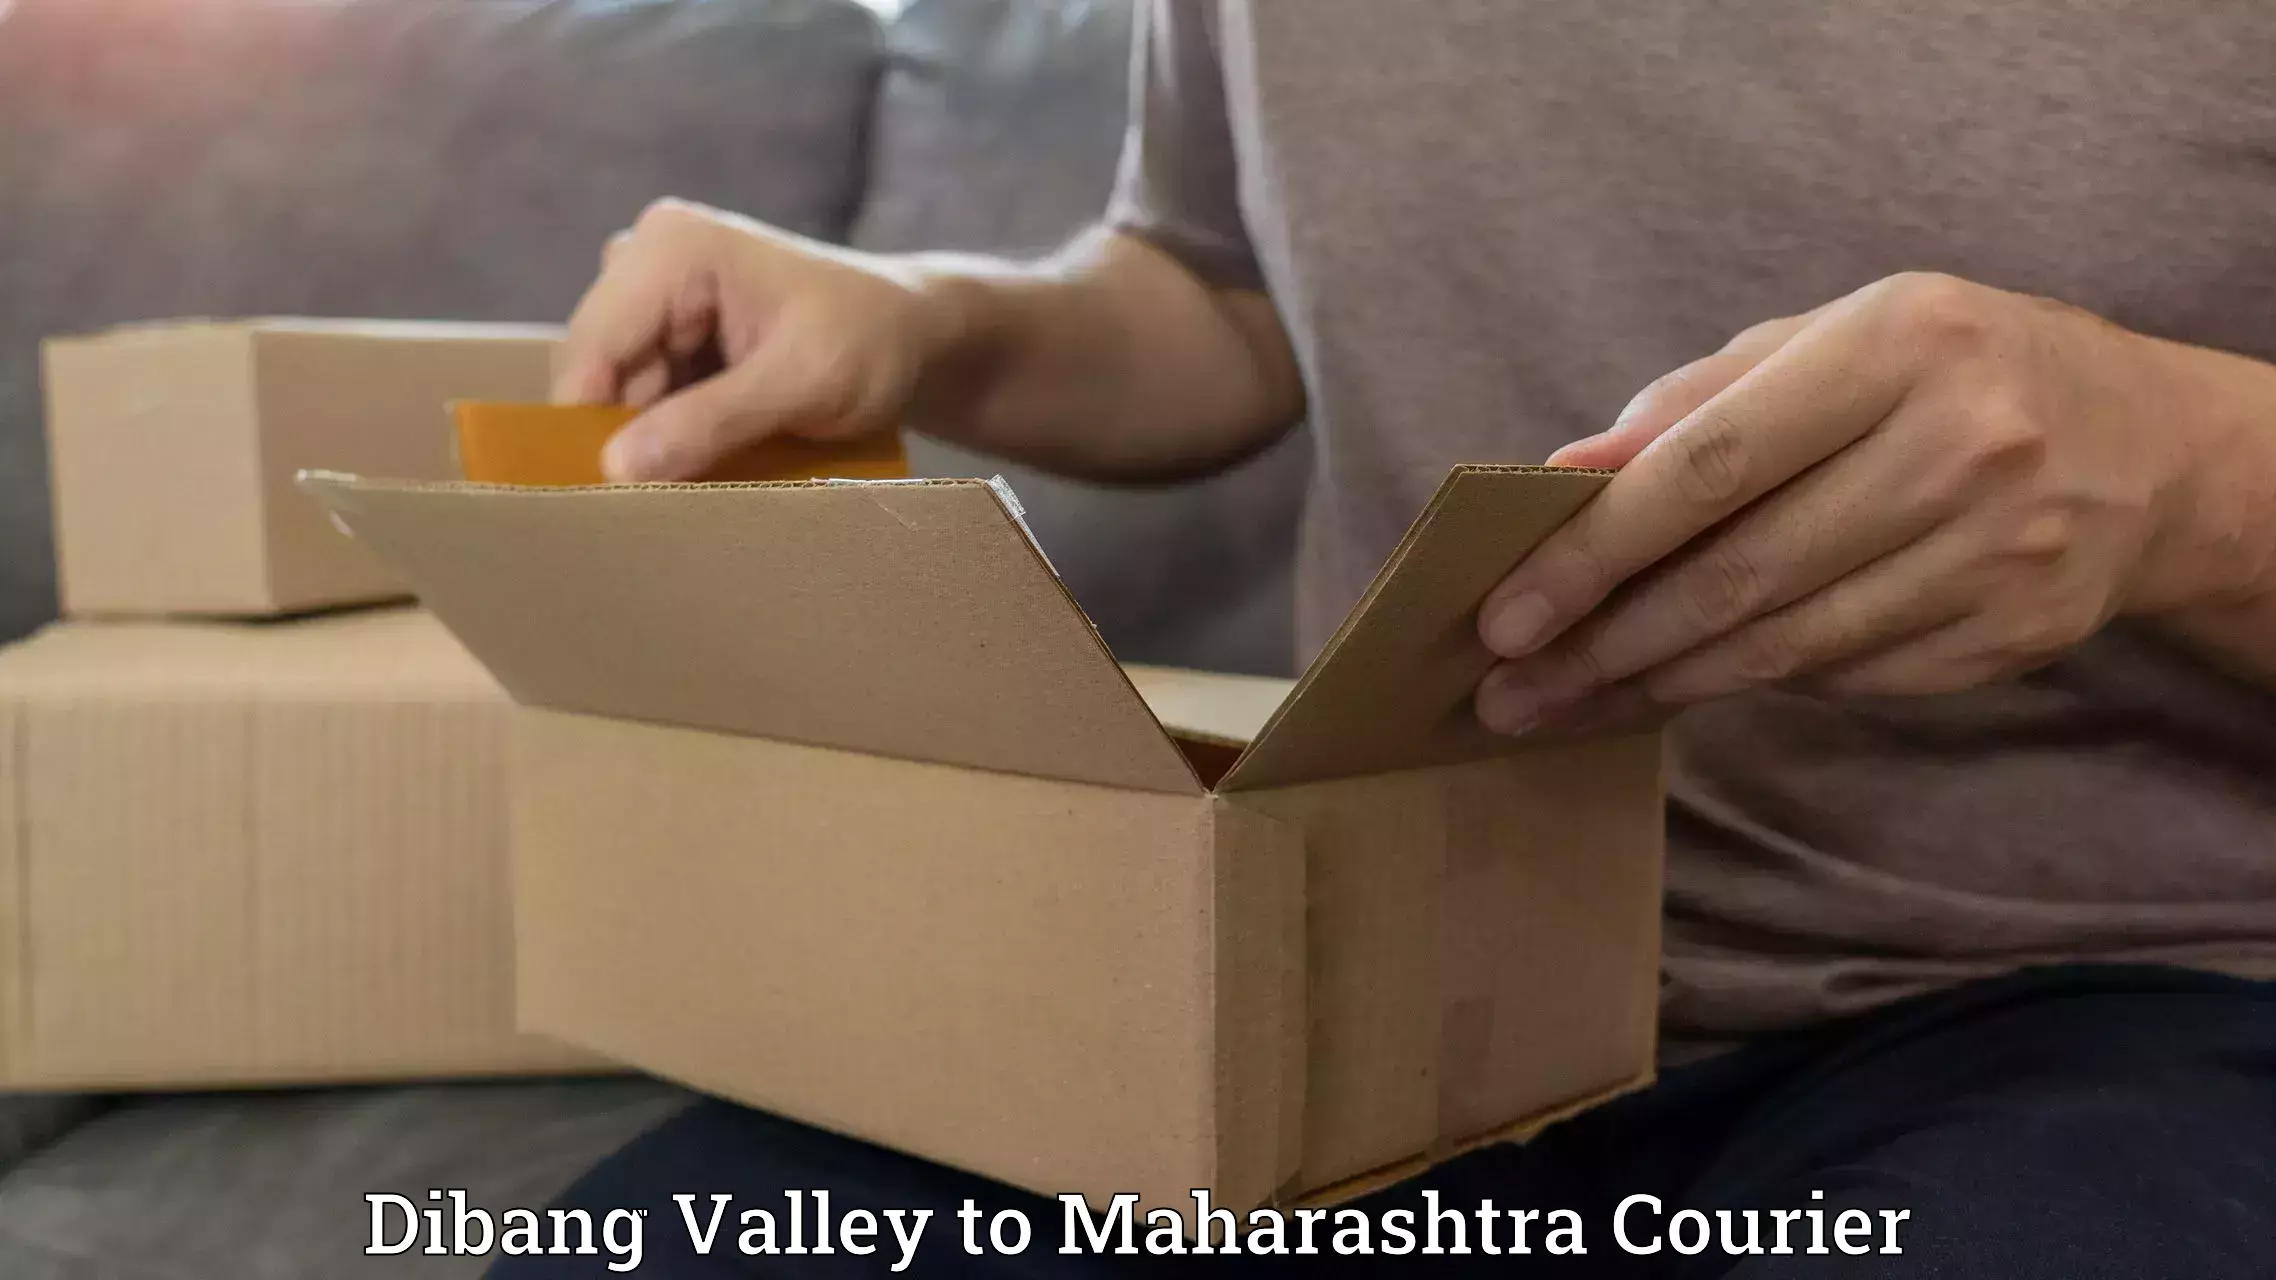 Courier tracking online Dibang Valley to Mahabaleshwar